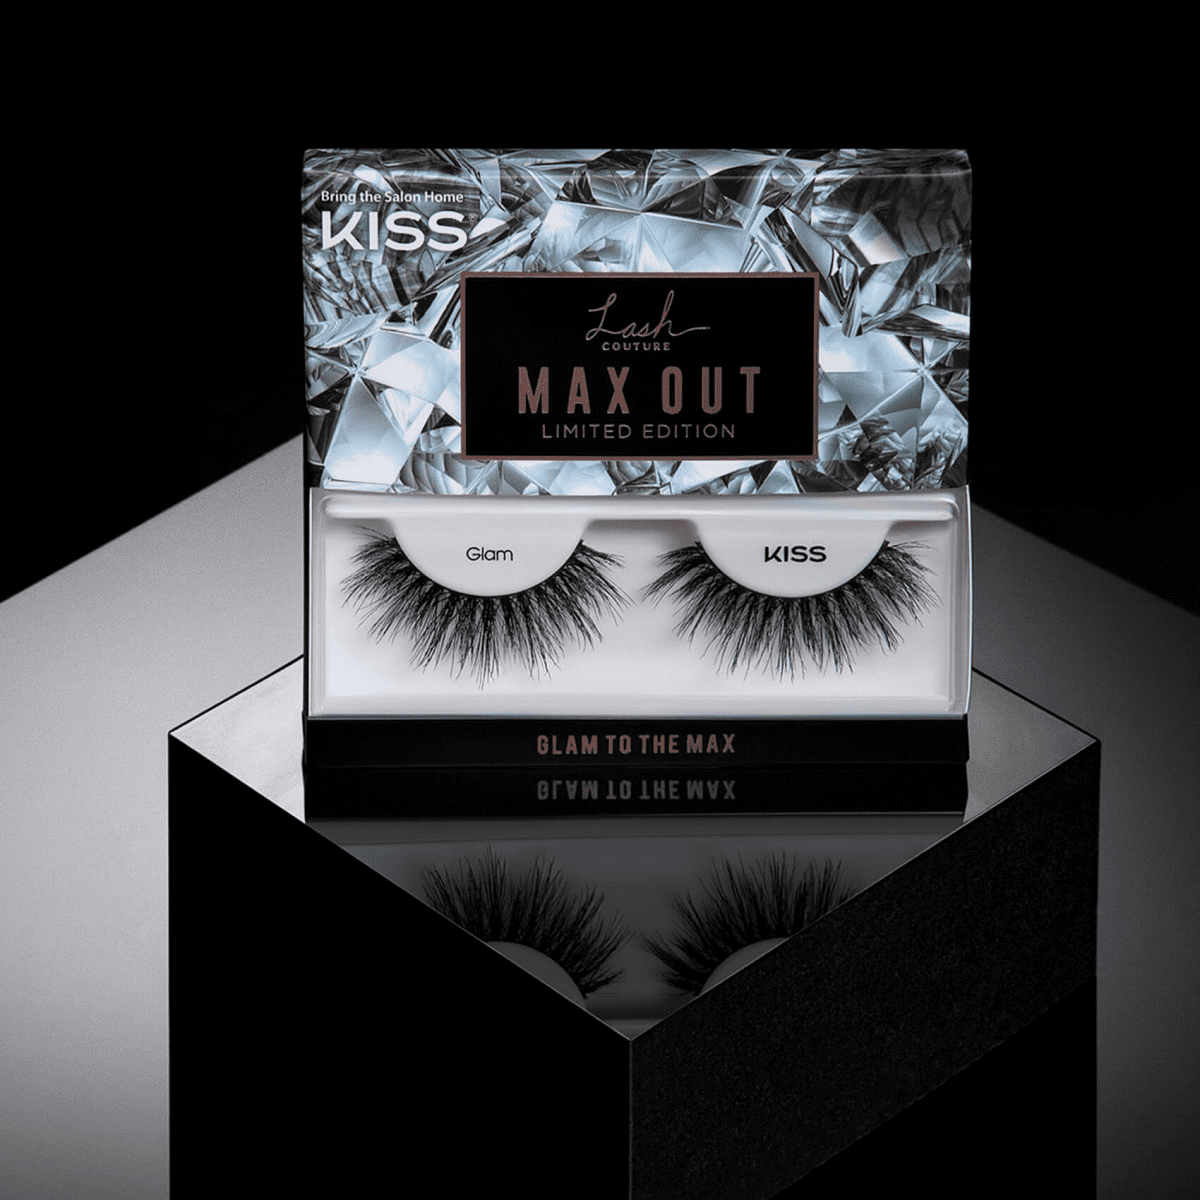 KISS Lash Couture Max Out Limited Edition - Glam to the Max